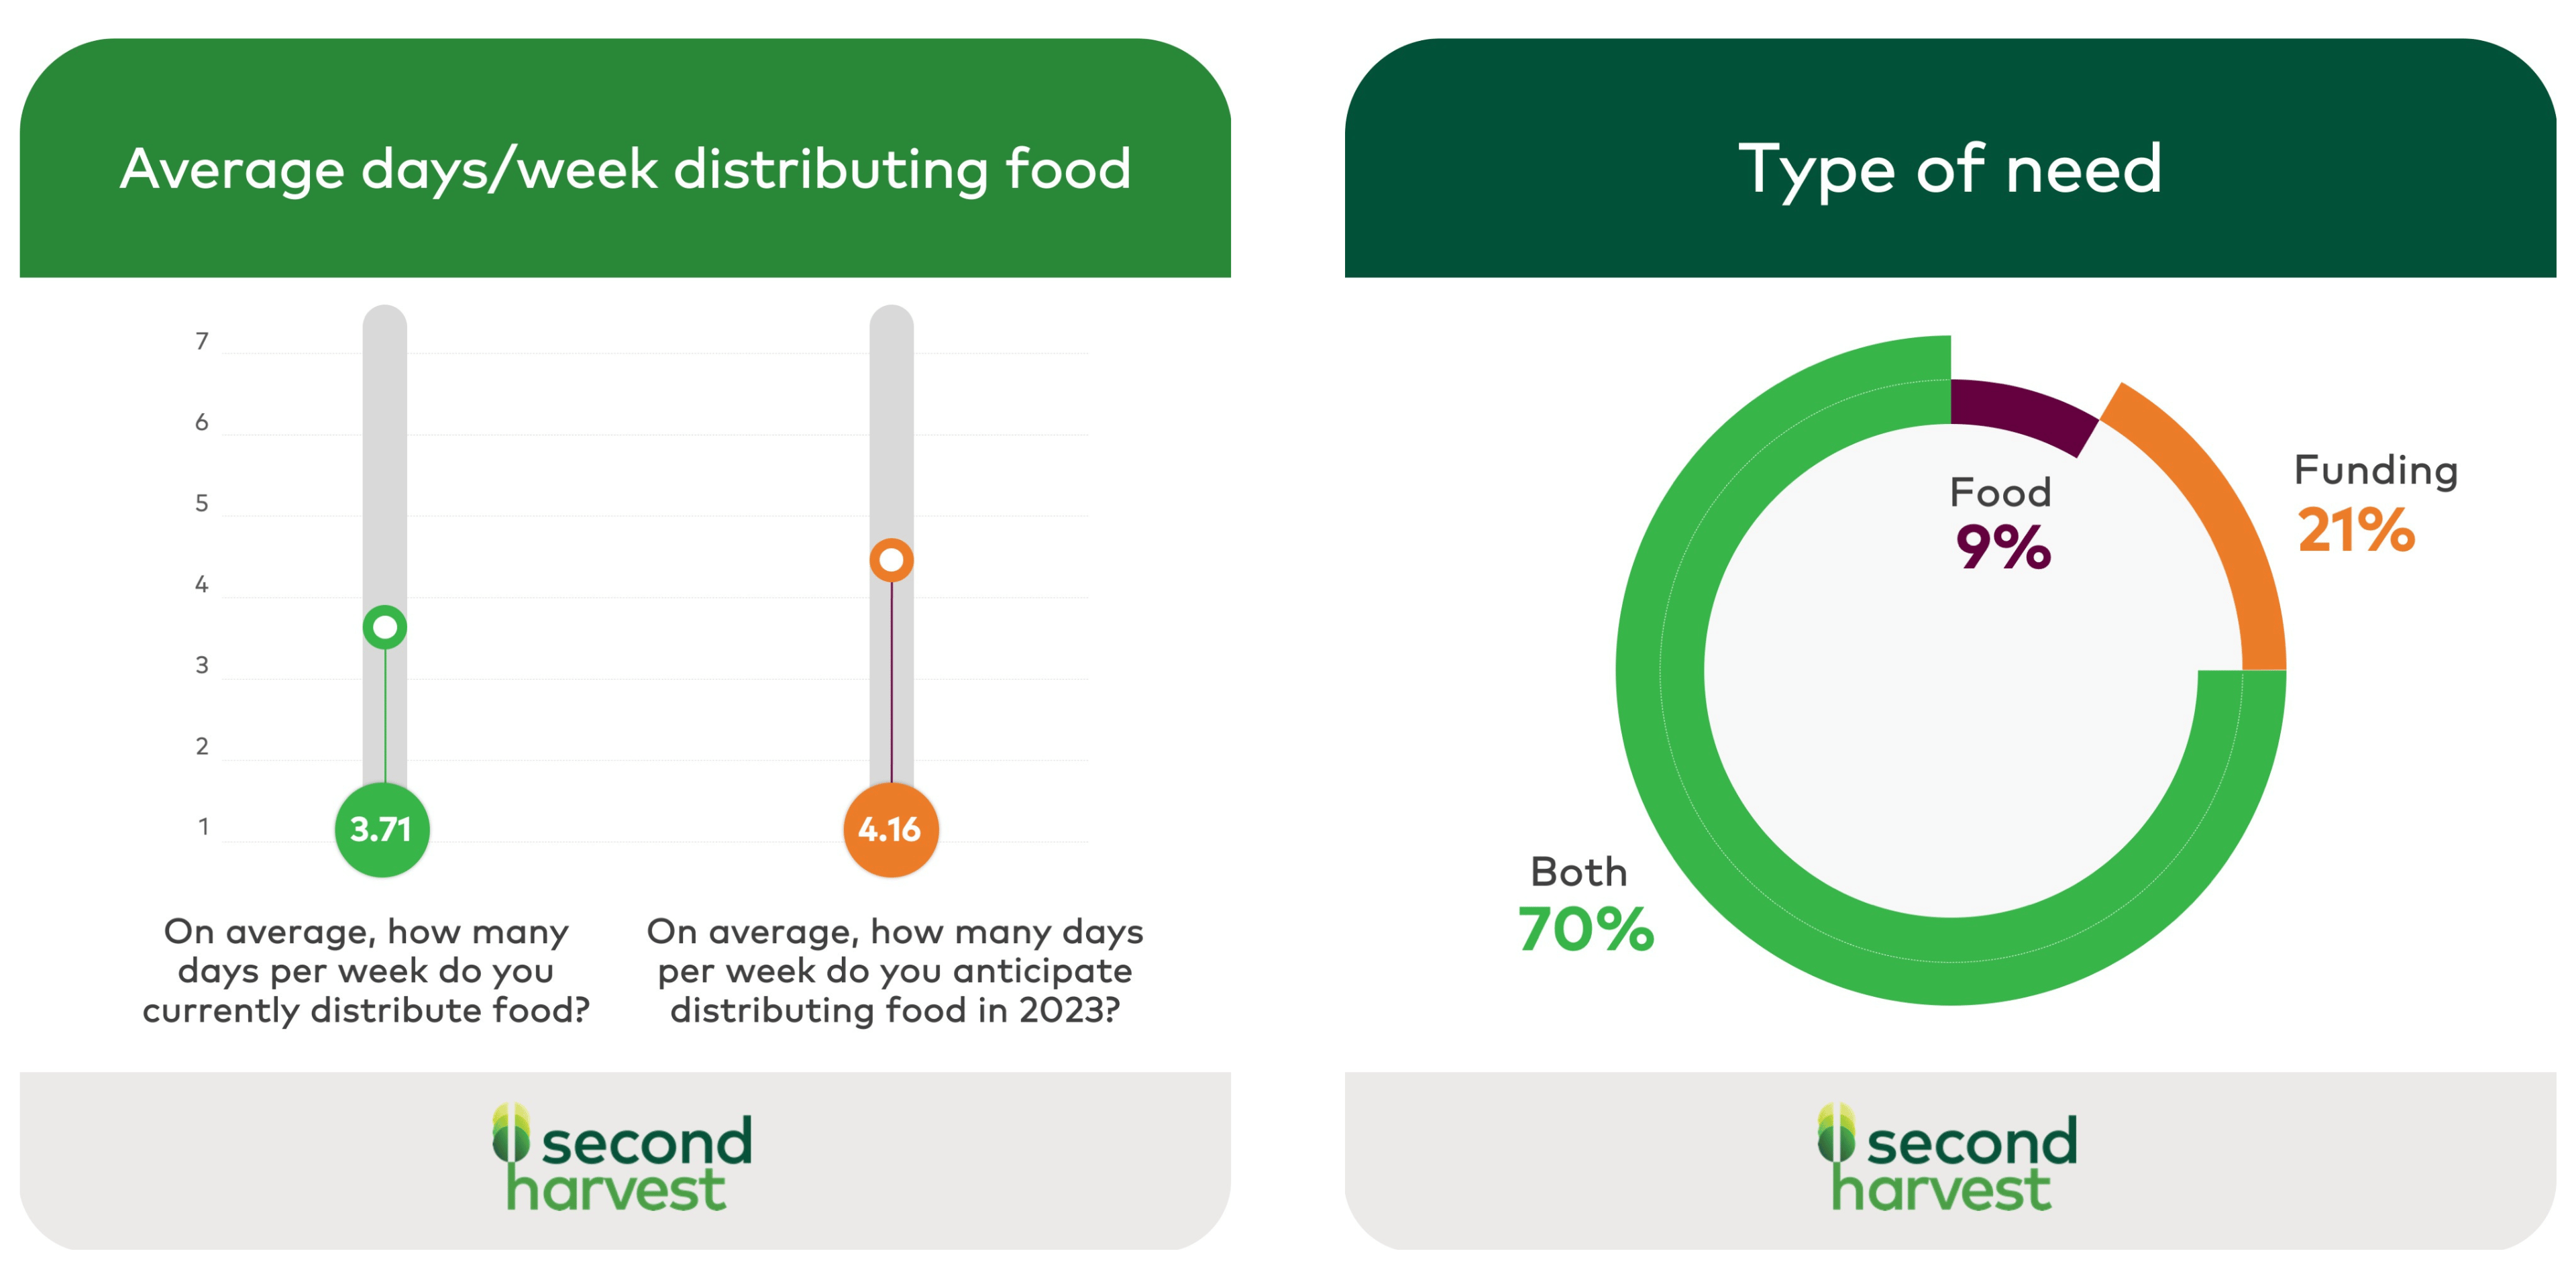 A table and a pie chart are shown. The table shows that more food is being distributed now. The pie chart shows that organizations need both food and funding.